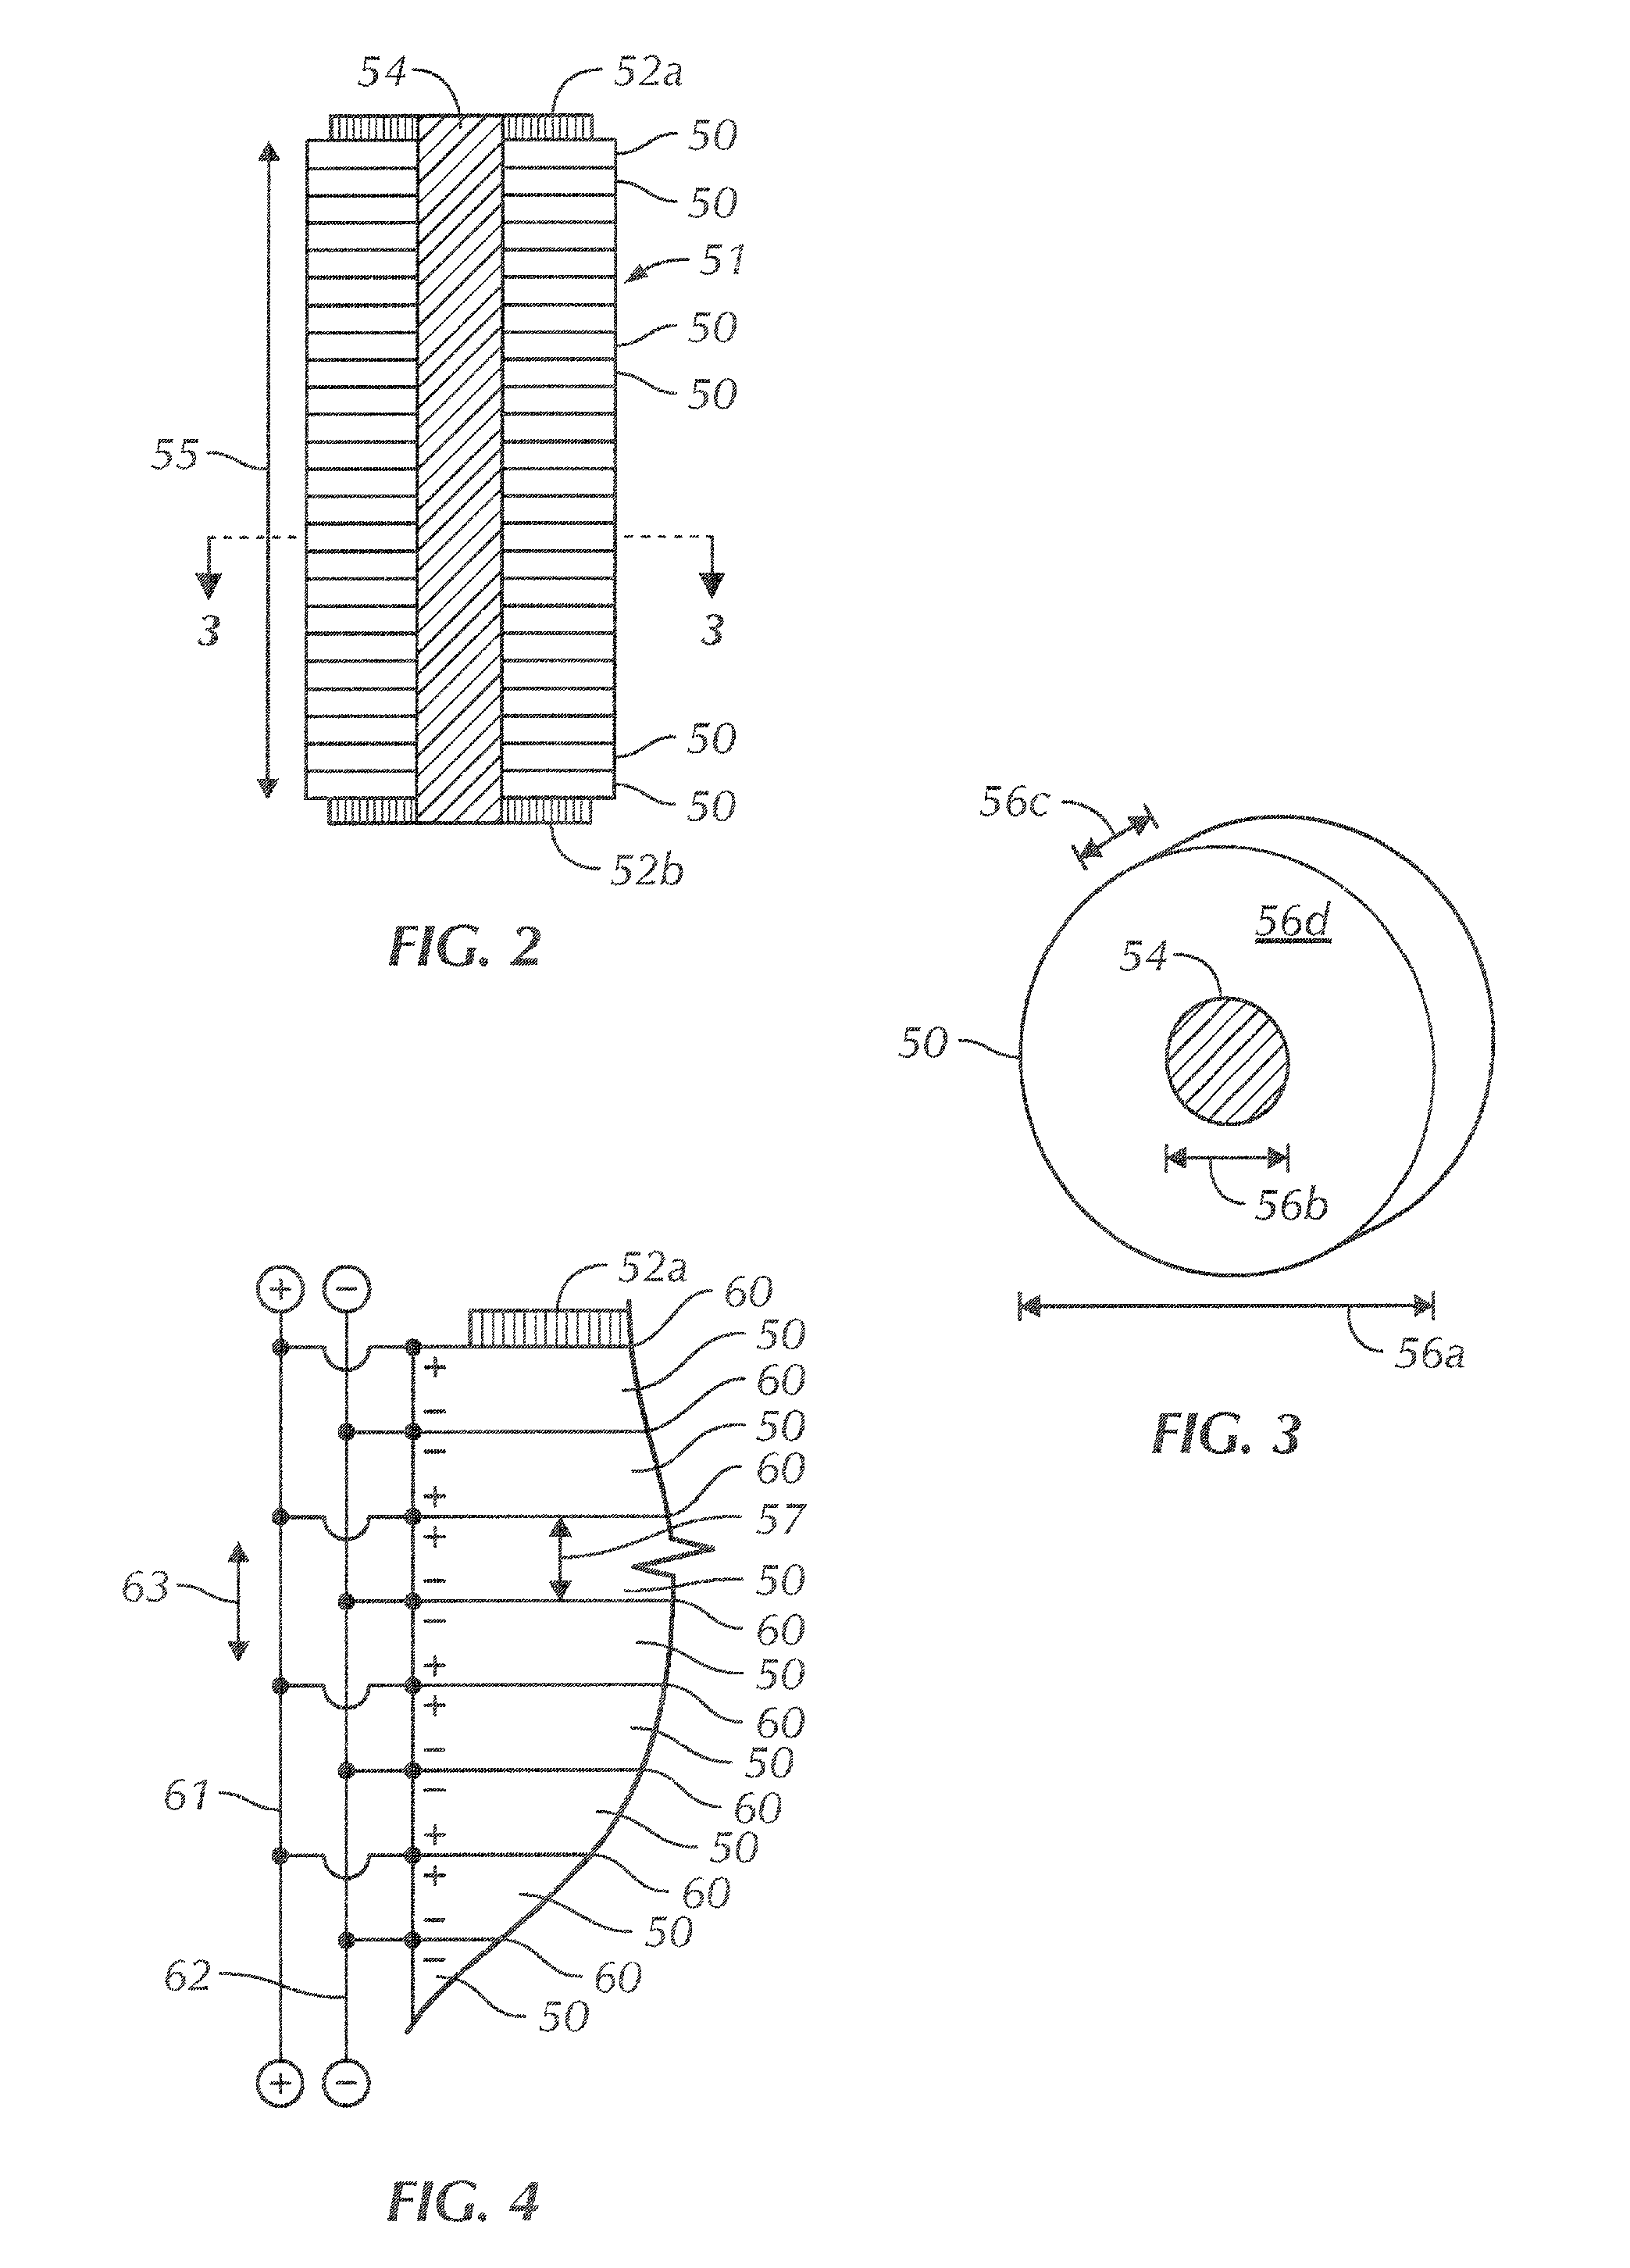 Monopole acoustic transmitter comprising a plurality of piezoelectric discs